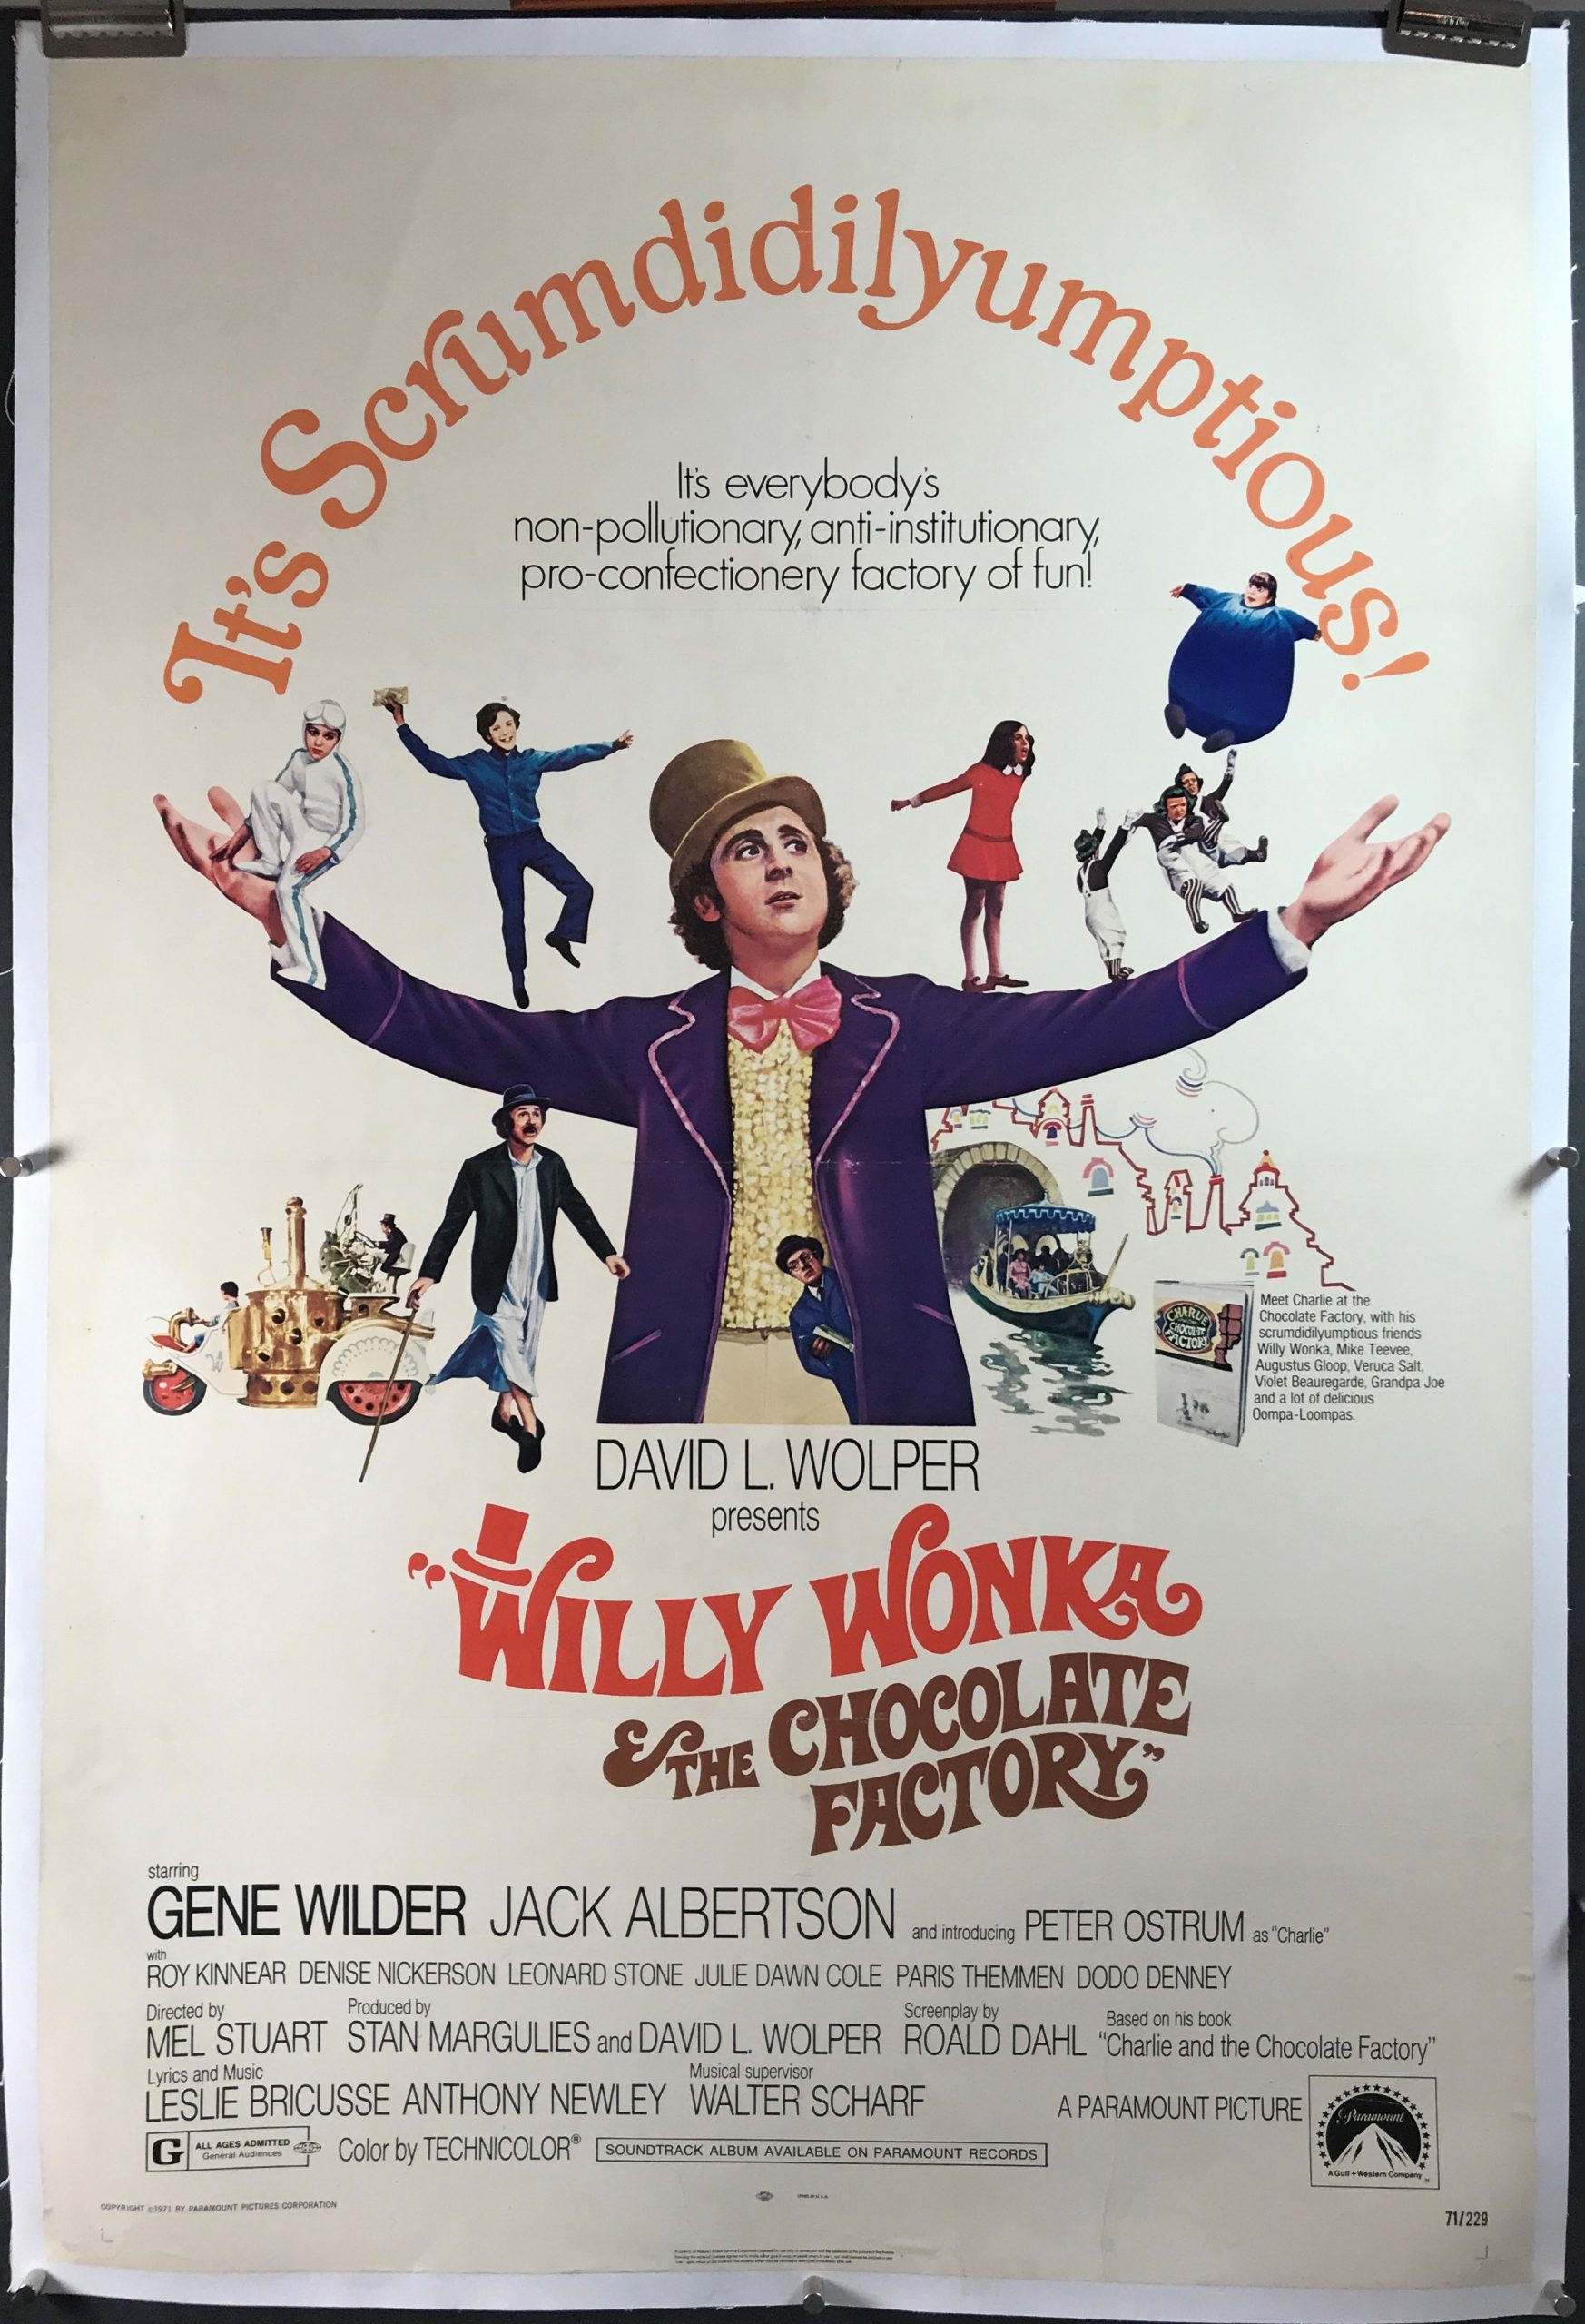 willy wonka and the chocolate factory album cover